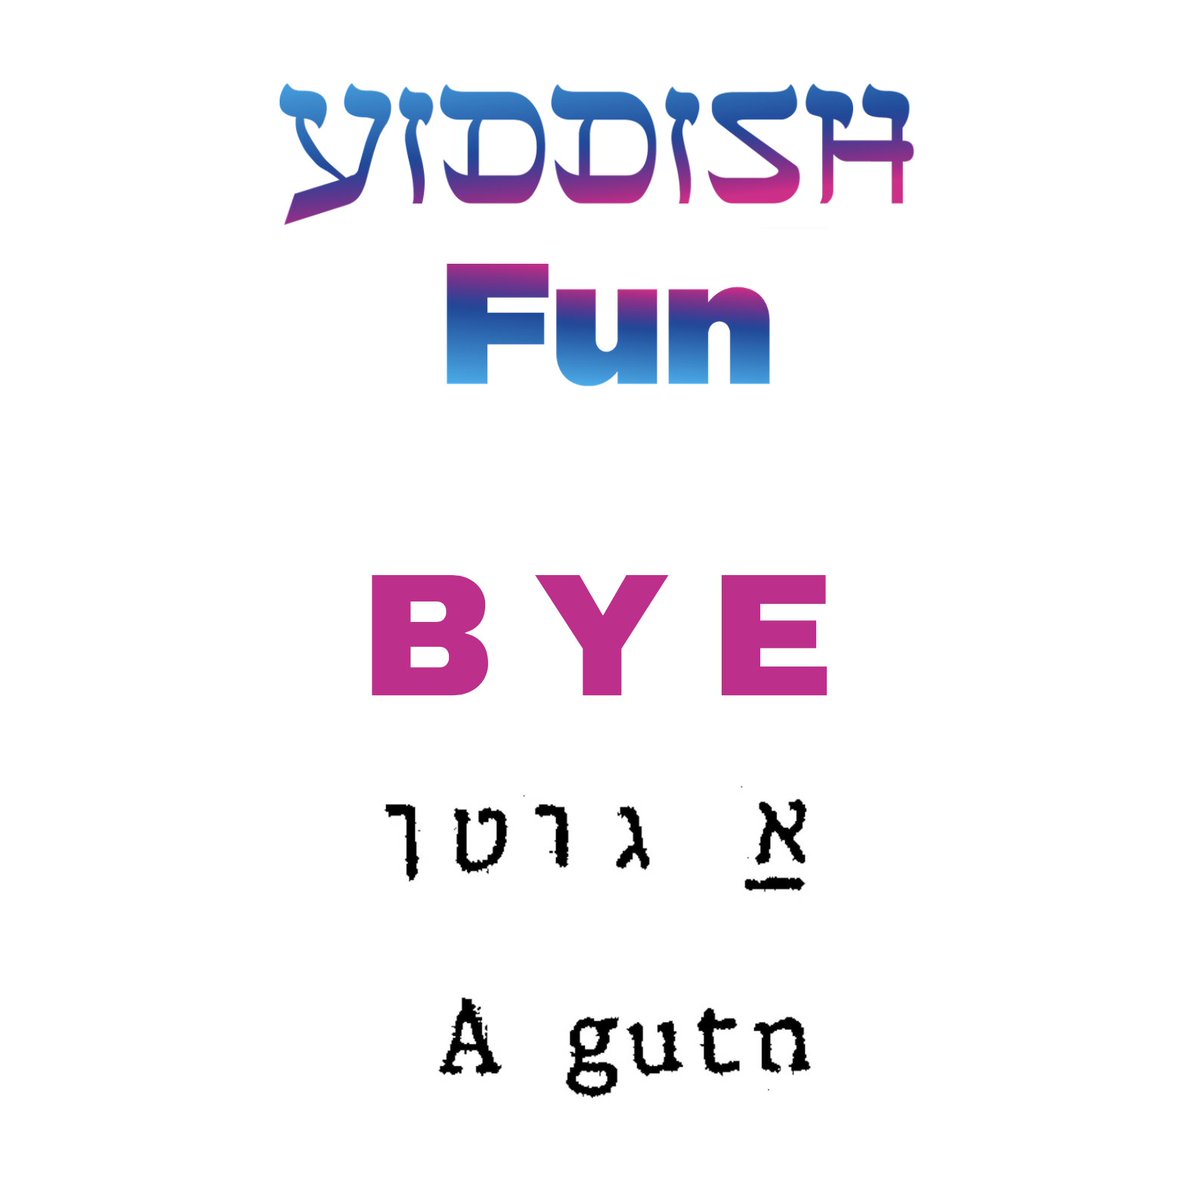 Ready to say BYE to 2020? 👋  Learn how to say it in Yiddish too! We have new sessions of Yiddish Fun-01 and Yiddish Fun-02 starting this January. 

Details 👉🏼 ow.ly/RPiM50CODl7
#yiddish #learnyiddish #yiddishclass

#yiddish #yiddishlanguage